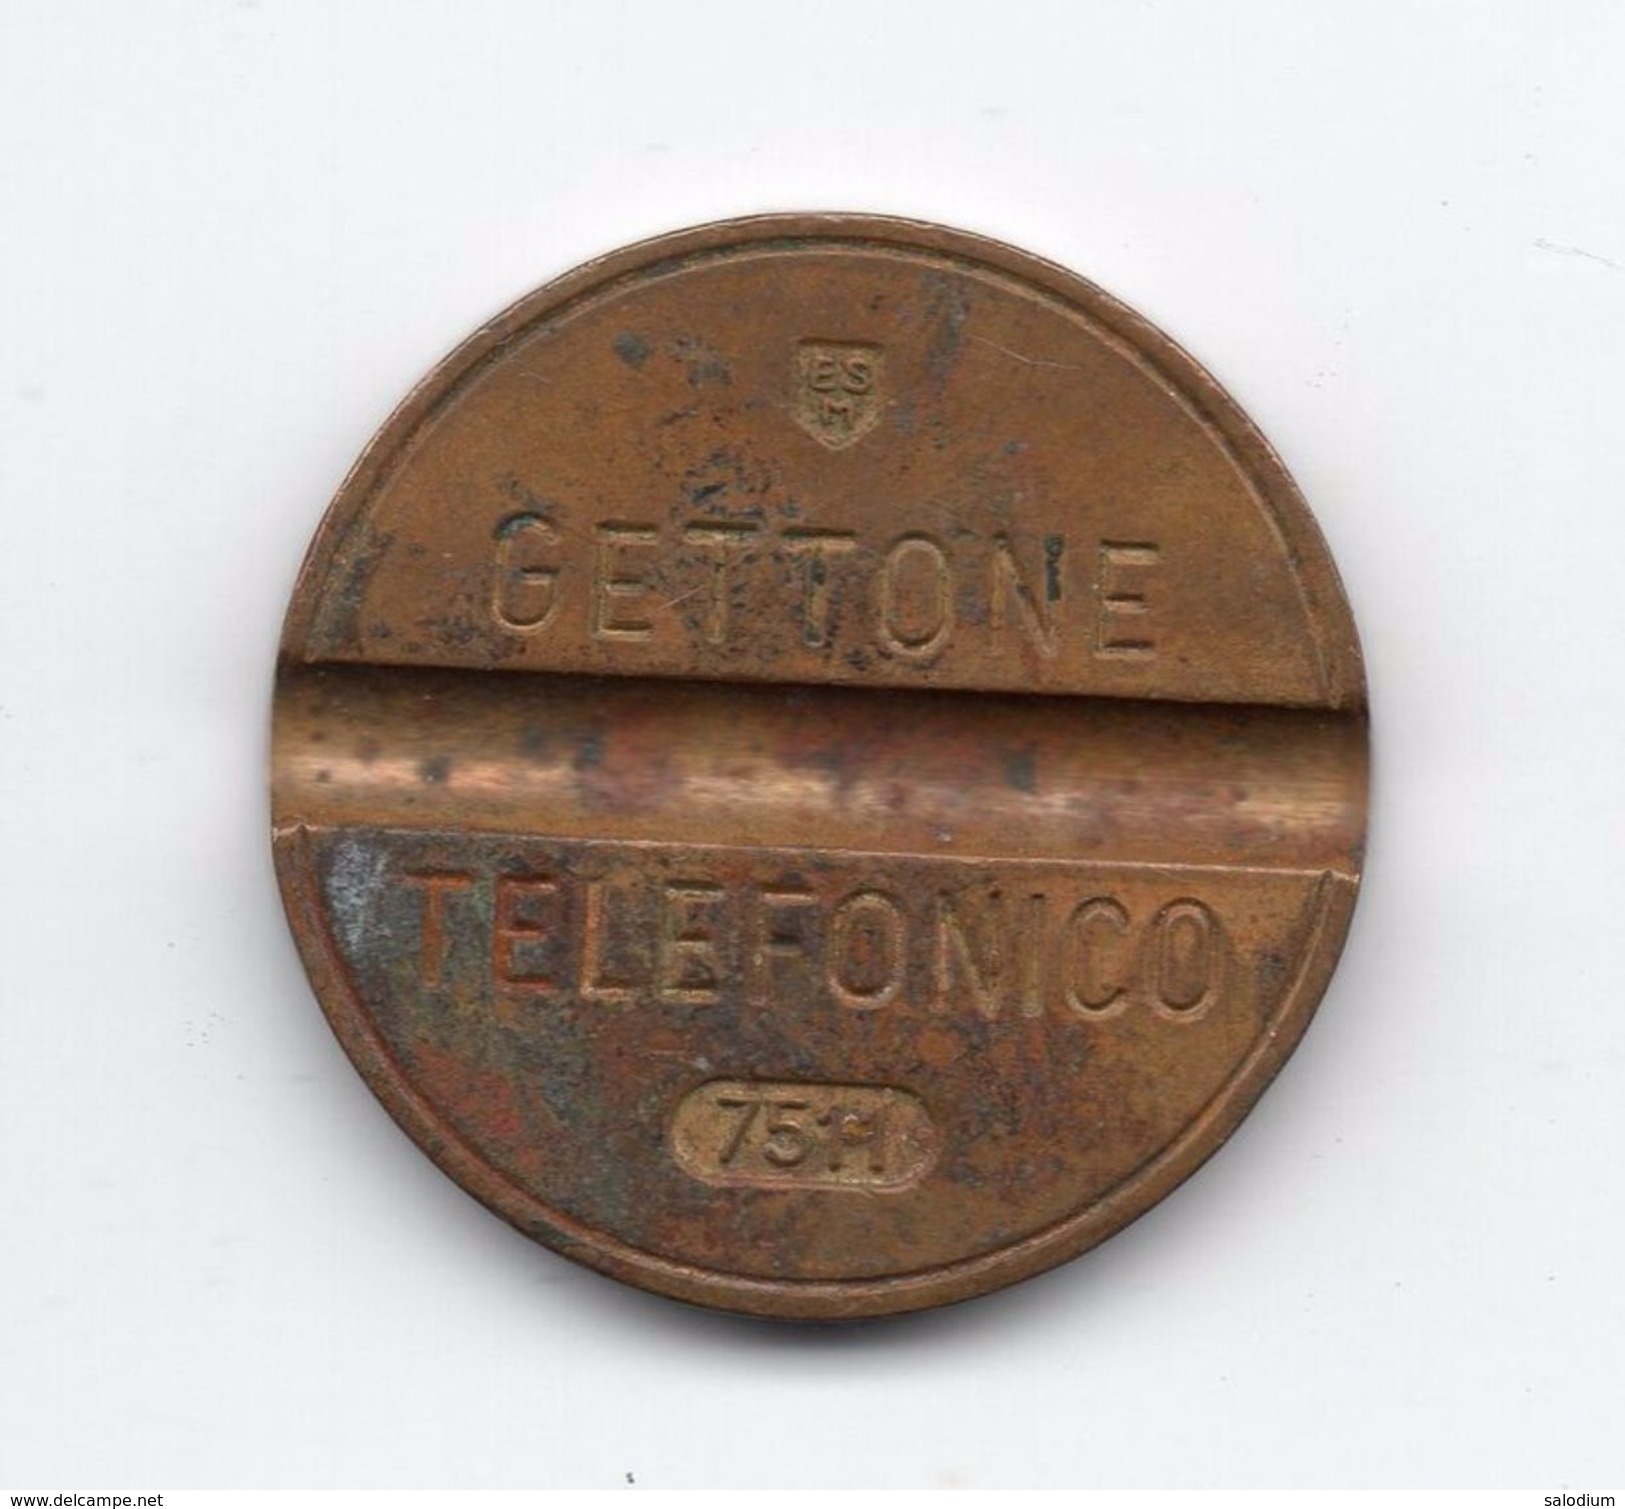 Gettone Telefonico 7511 Token Telephone - (Id-683) - Professionals/Firms